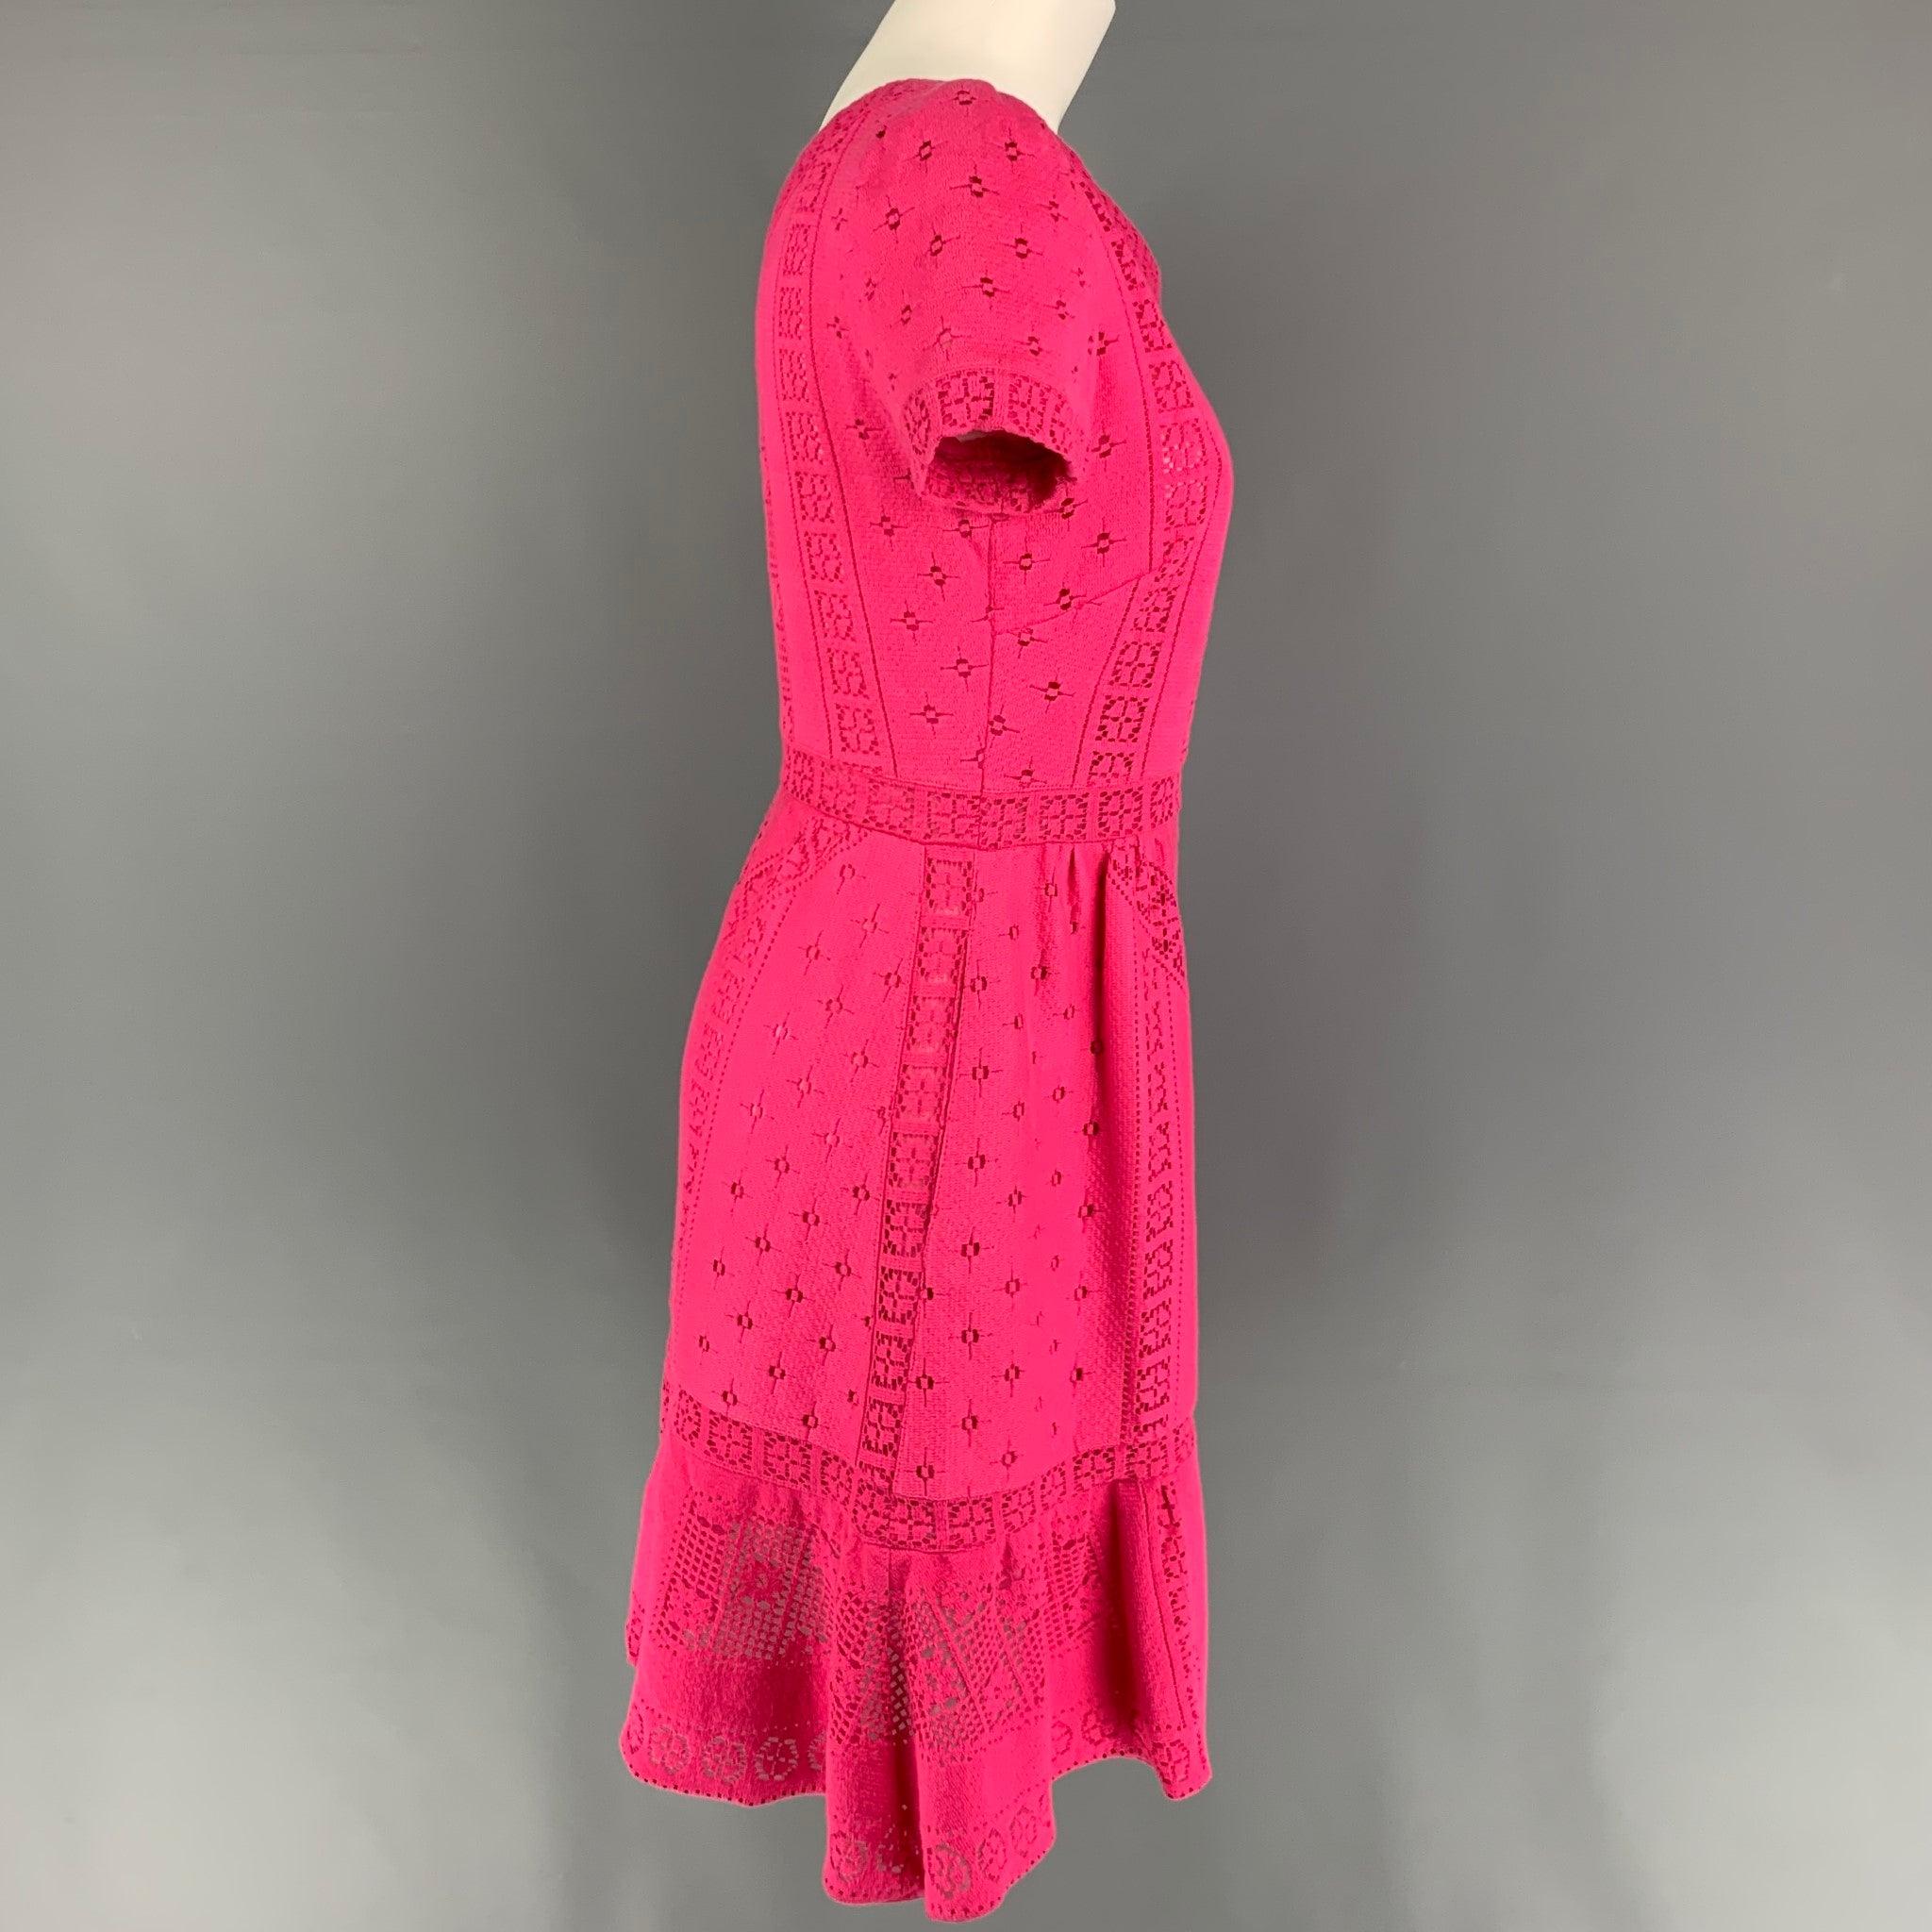 VALENTINO dress comes in a pink lace cotton / nylon with a slip liner featuring an a-line style, short sleeves, slit pockets, v-neck, and a side zipper closure. Made in Italy.
Very Good Pre-Owned Condition. Fabric tag removed.  

Marked:   8